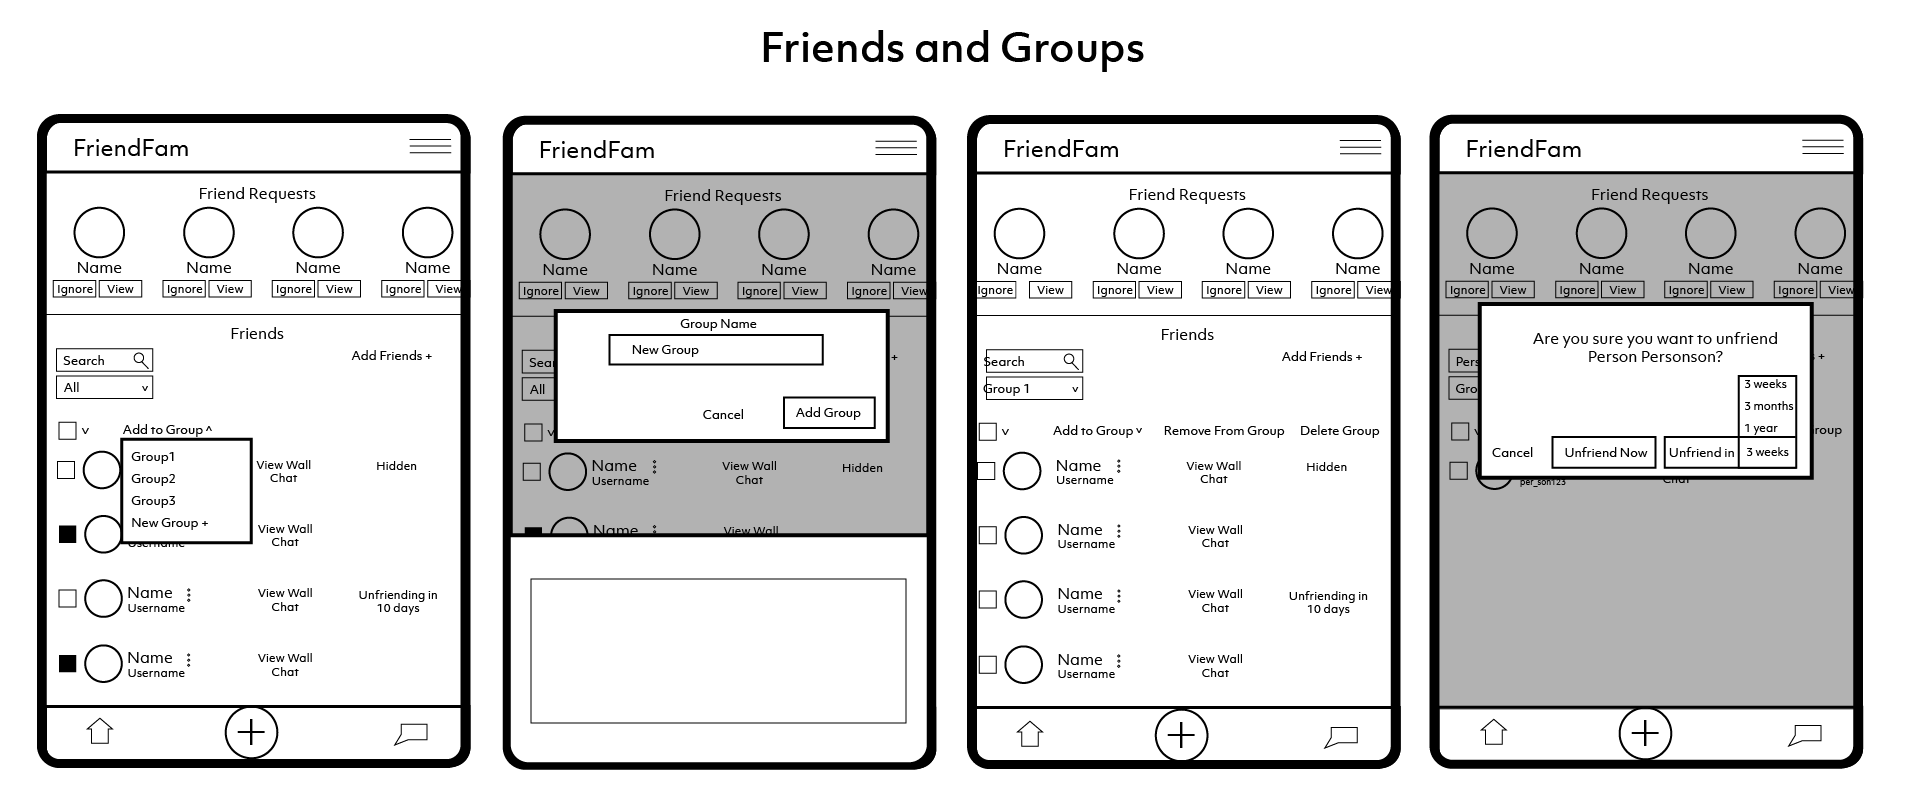 Wireframe drafts for the Friends and Groups page.